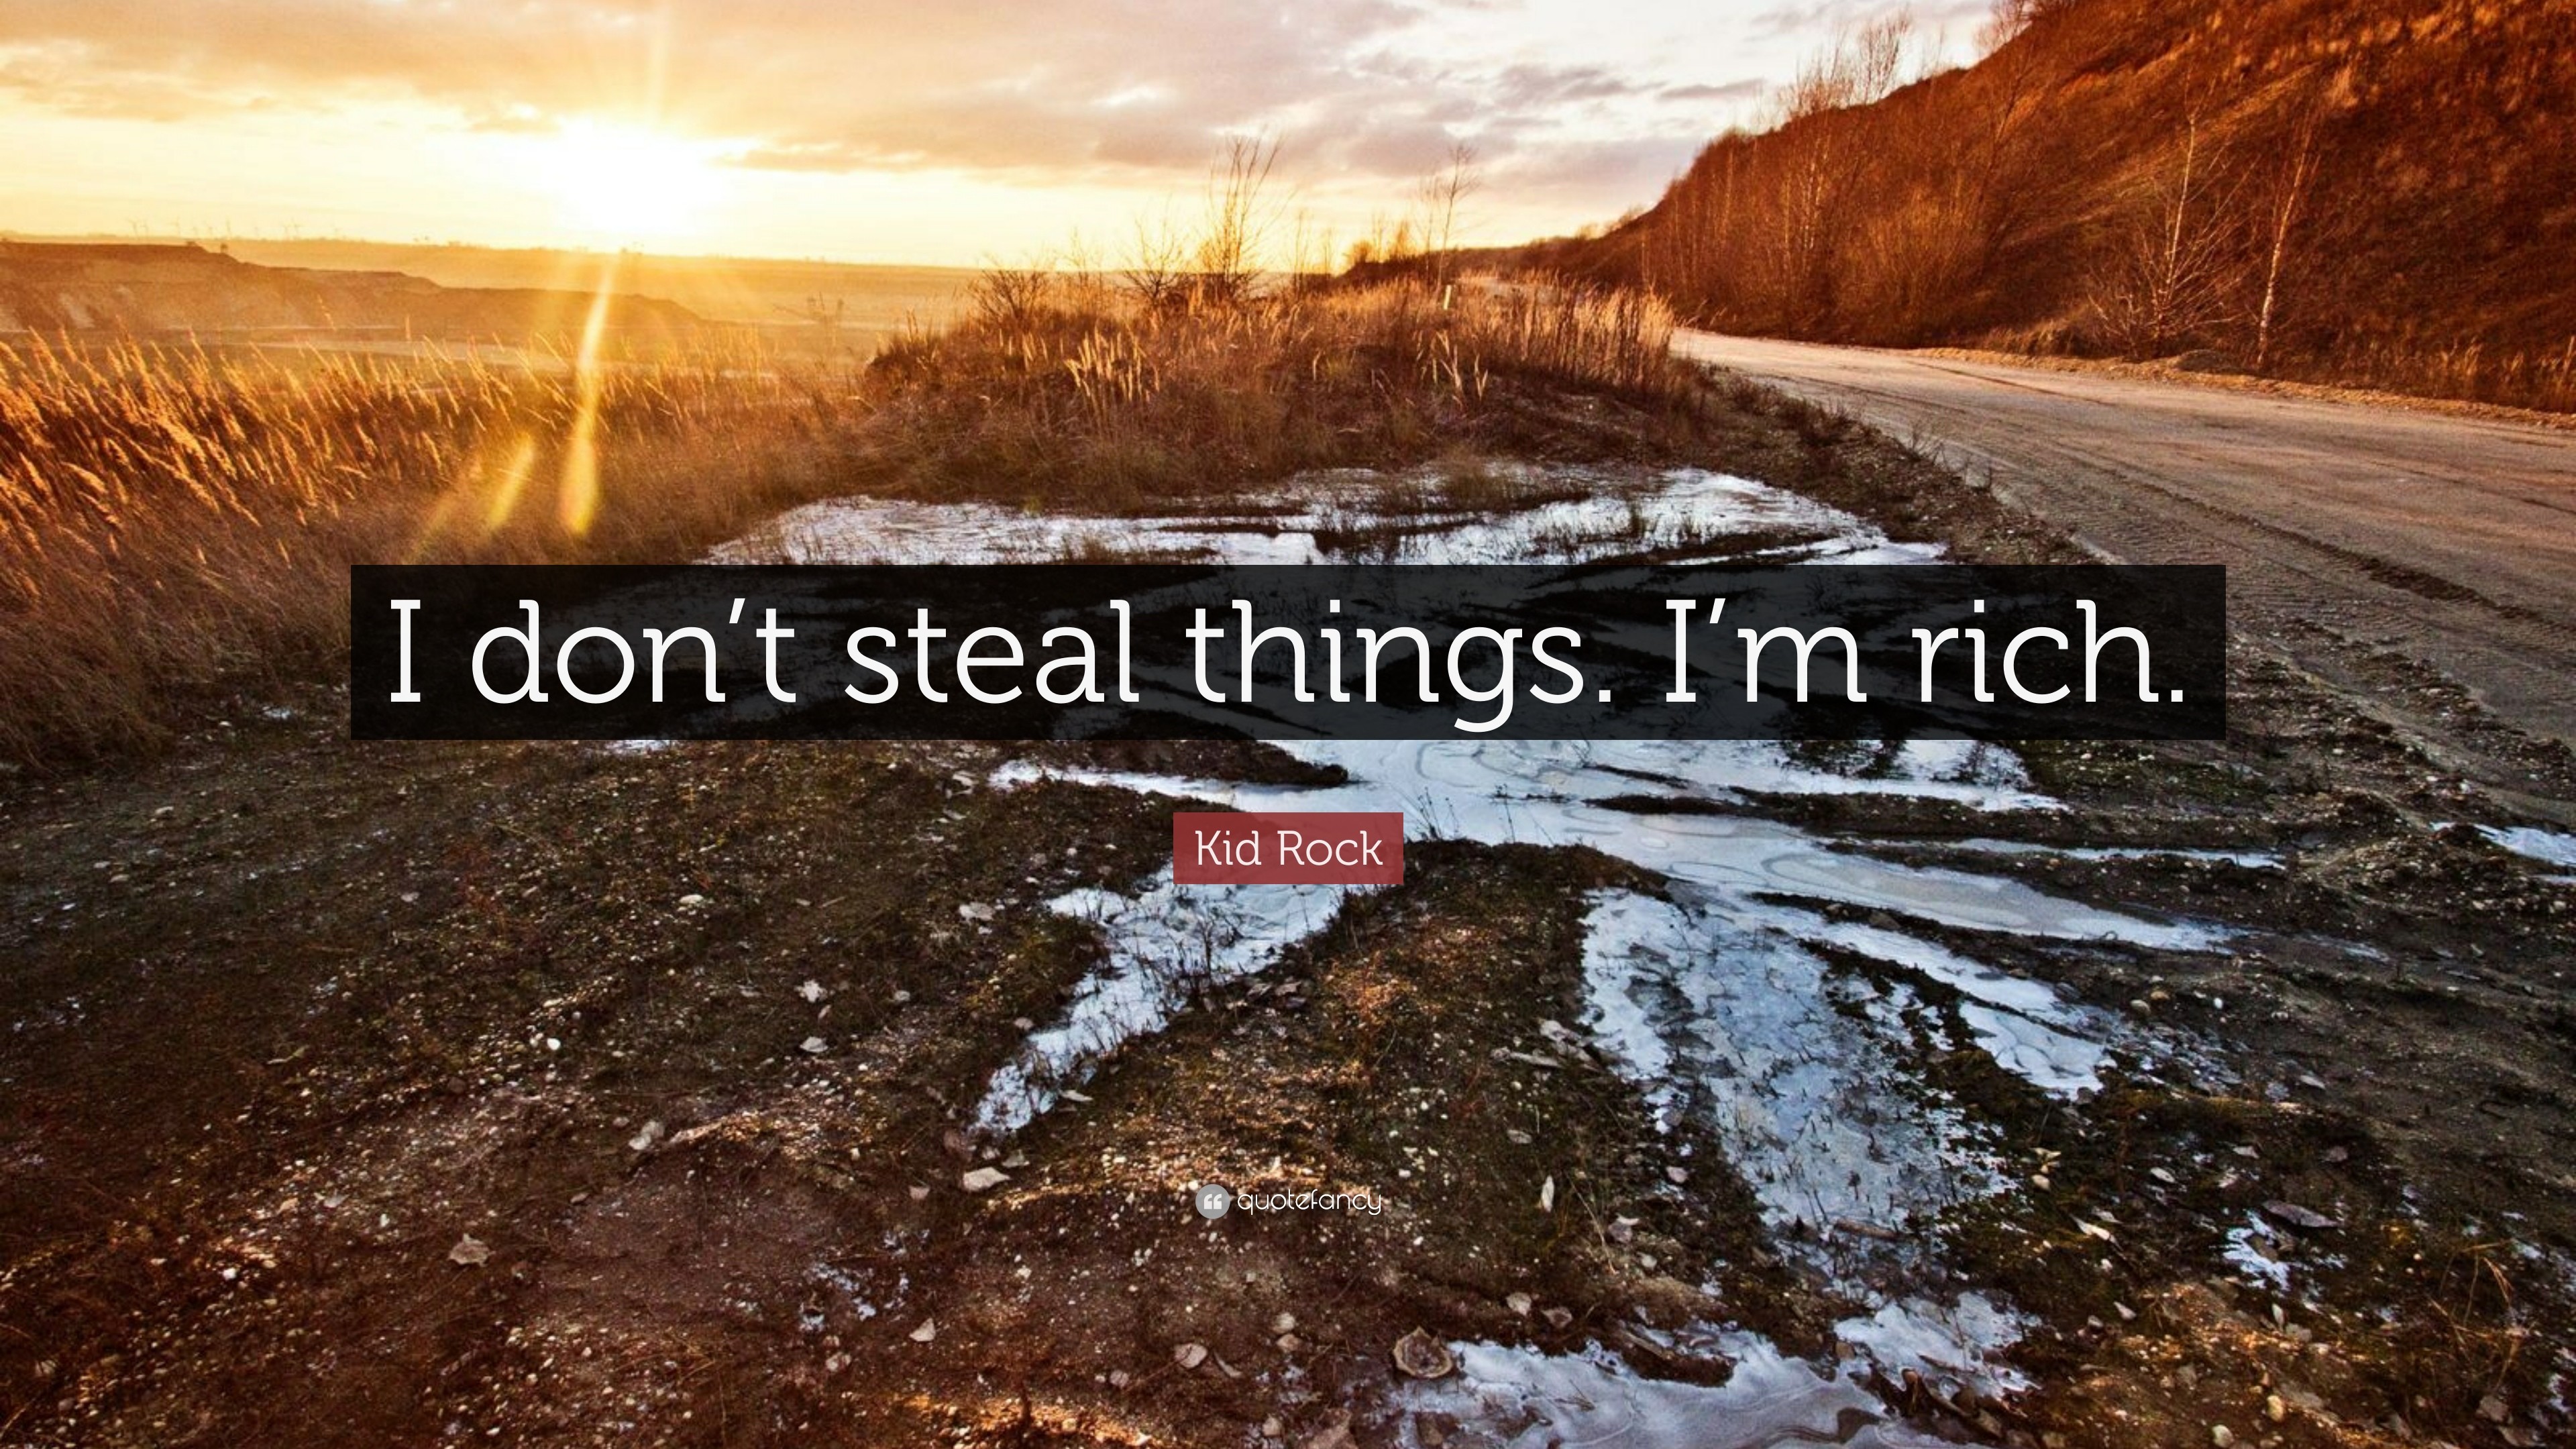 3840x2160 Kid Rock Quote: “I don't steal things. I'm rich